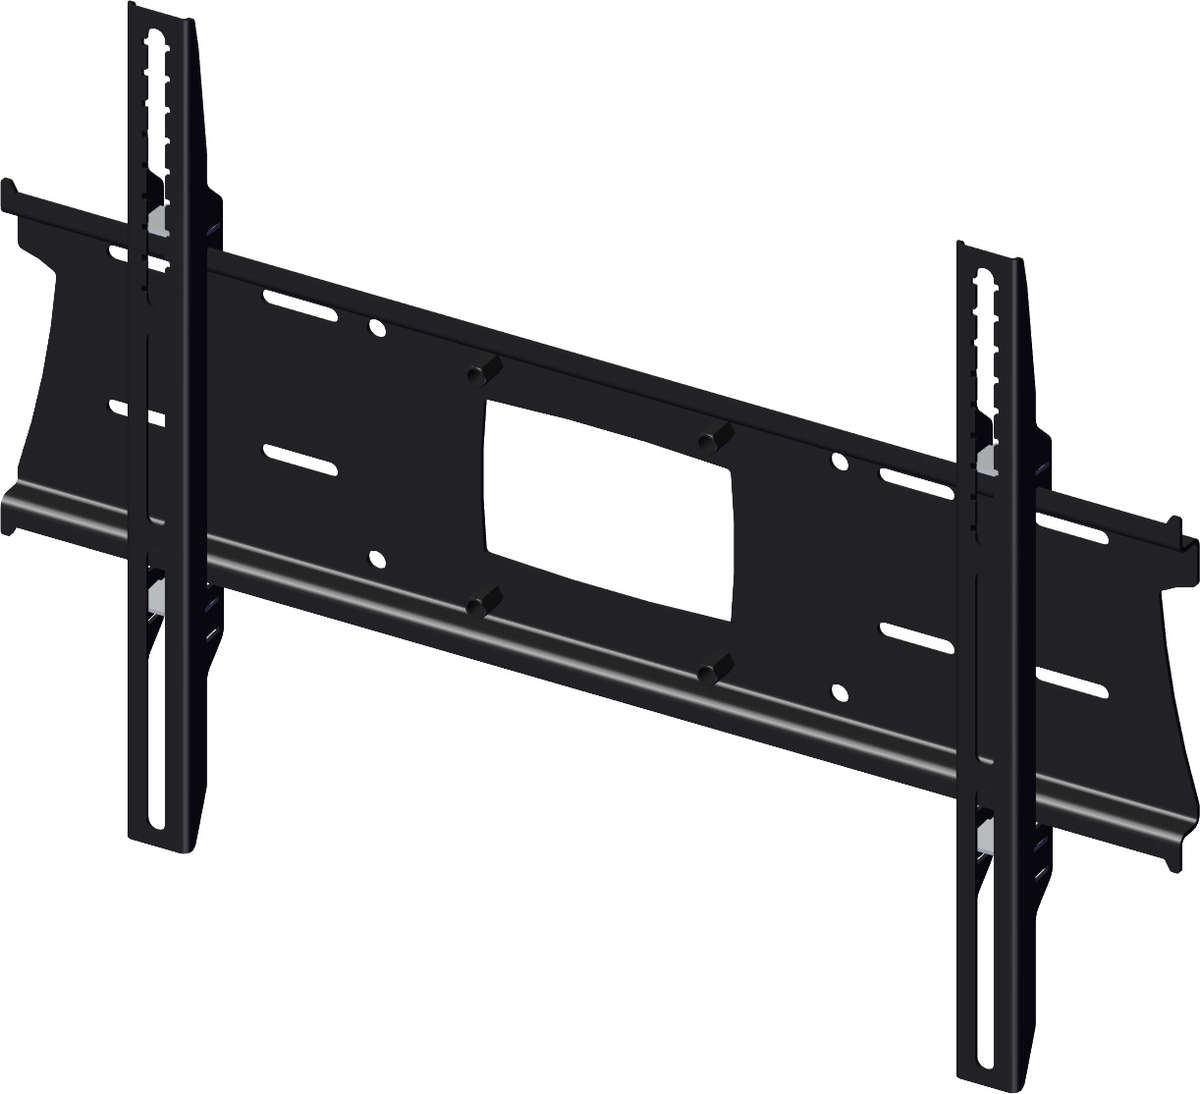 Unicol PZX1 Pozimount flat wall mount for monitors and TVs from 33 to 70 inches product image